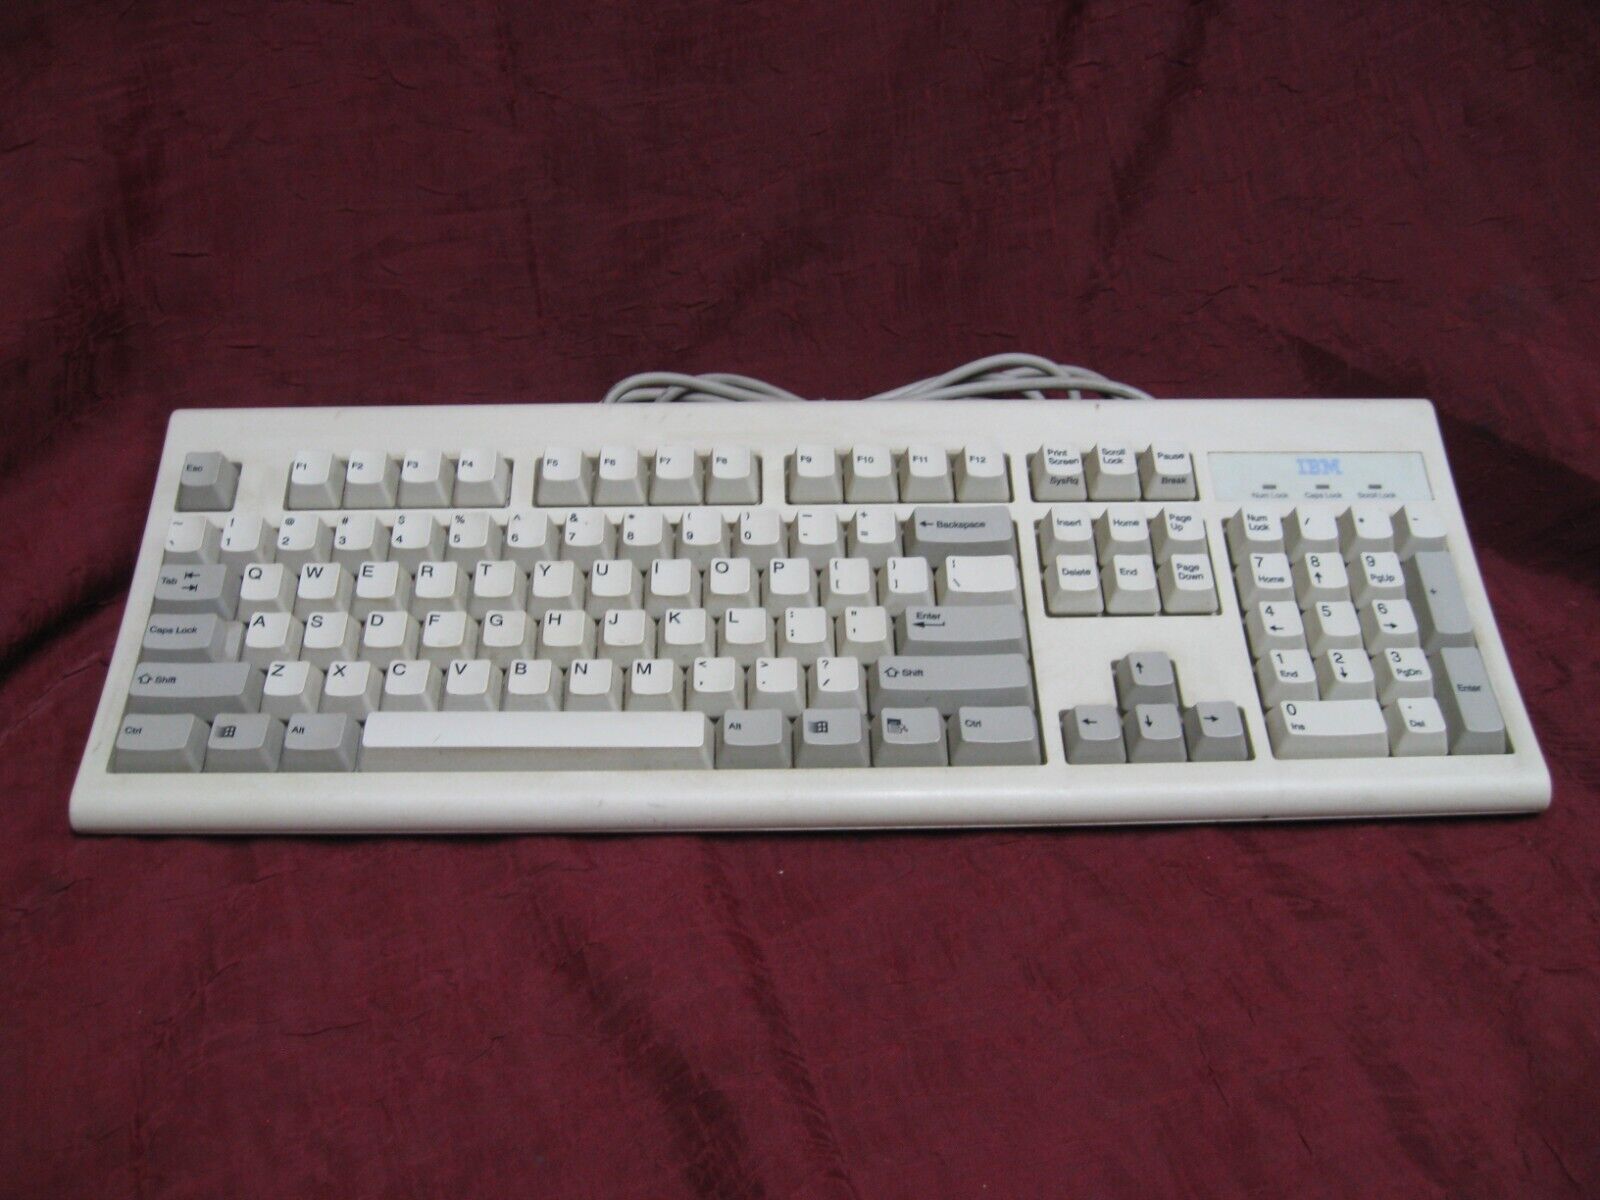 Vintage IBM PC KB-8923 PS/2 Keyboard Tested & Fully Working - Lightly Cleaned